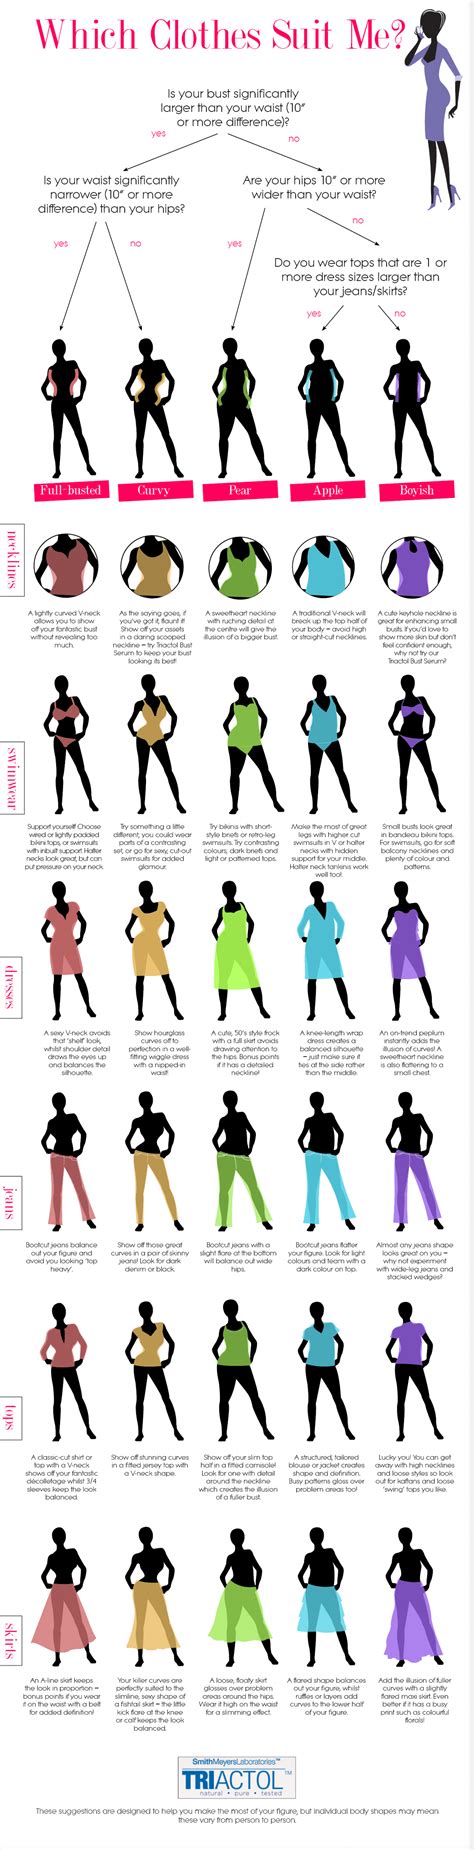 A Guide To Womens Clothing Based On Body Type Visually